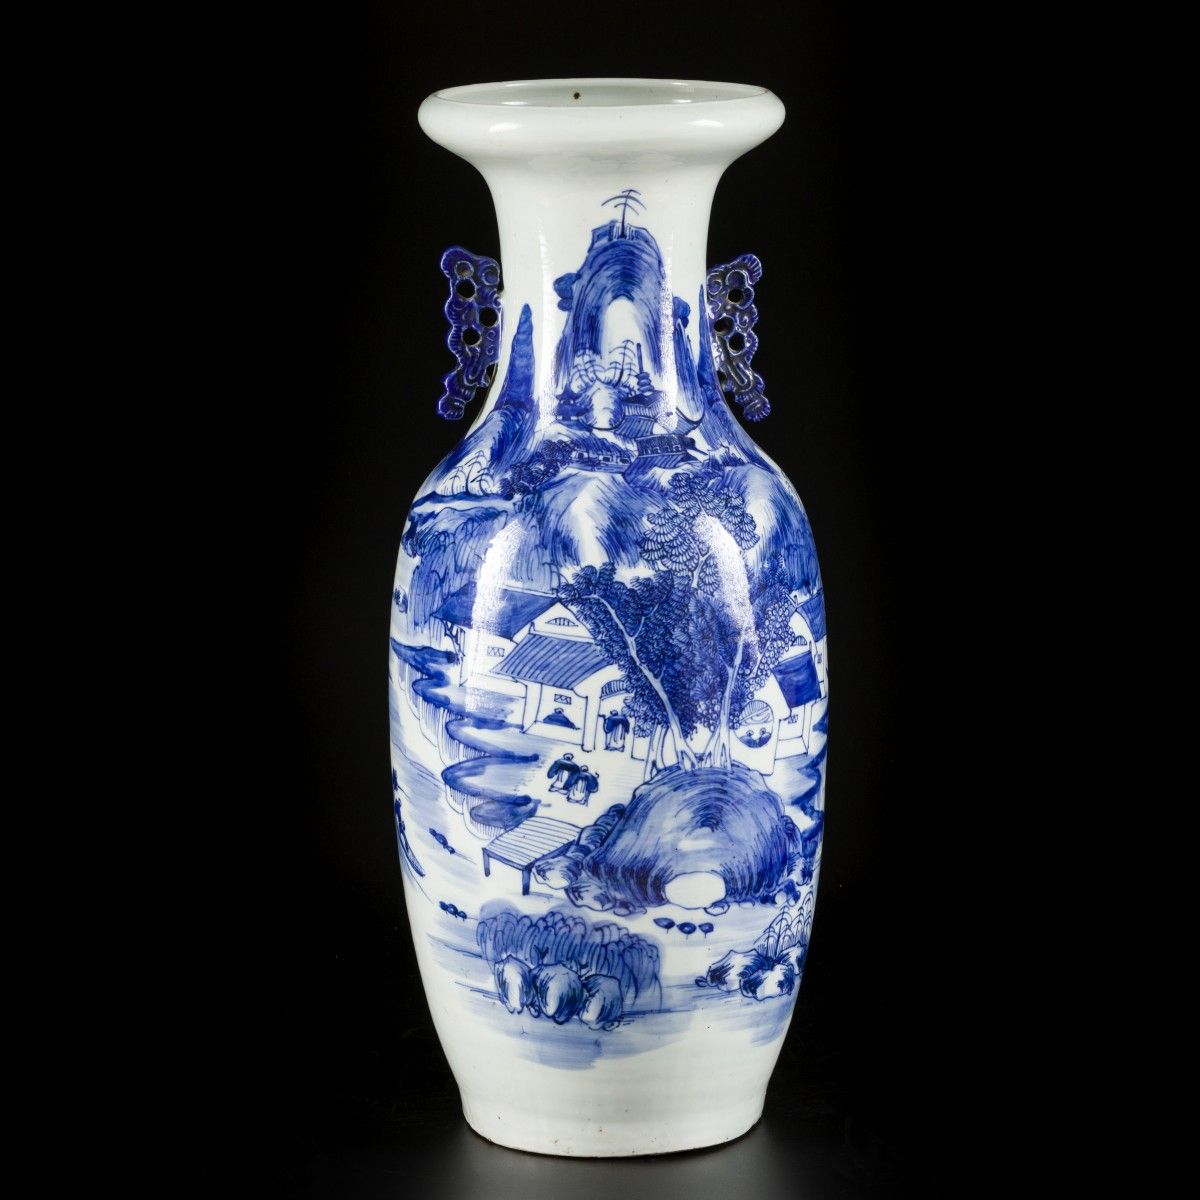 A porcelain baluster vase with landscape decoration, China, late 19th century. A&hellip;